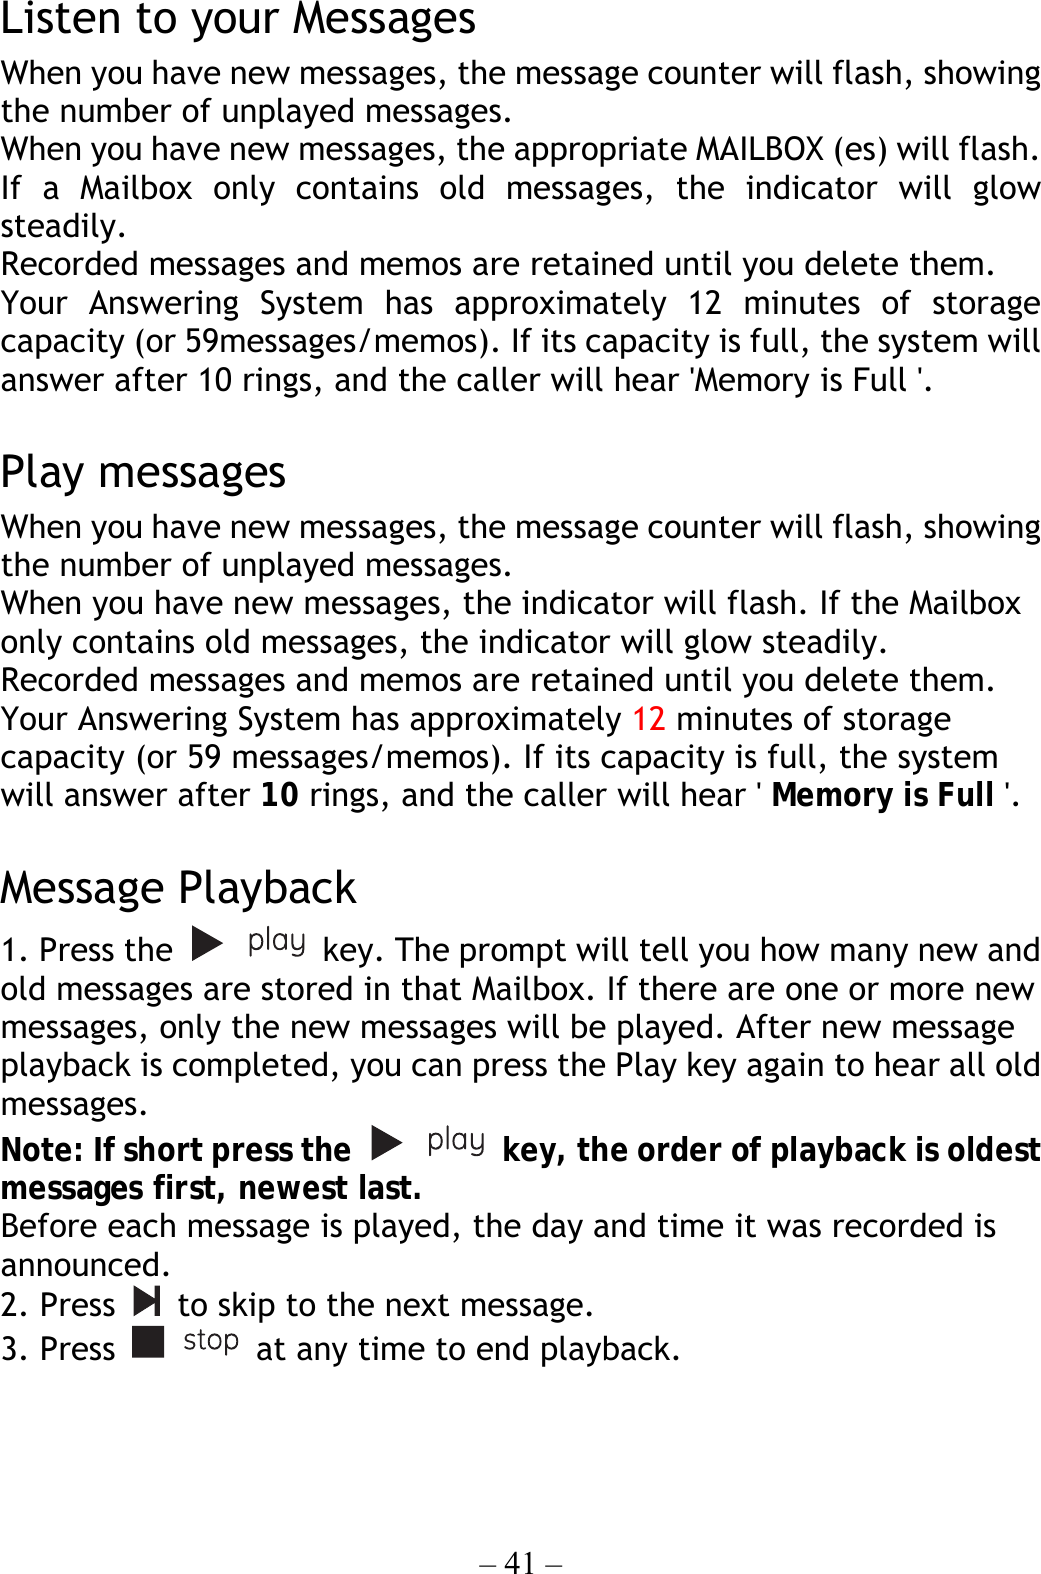 – 41 –  Listen to your Messages When you have new messages, the message counter will flash, showing the number of unplayed messages. When you have new messages, the appropriate MAILBOX (es) will flash. If a Mailbox only contains old messages, the indicator will glow steadily. Recorded messages and memos are retained until you delete them. Your Answering System has approximately 12 minutes of storage capacity (or 59messages/memos). If its capacity is full, the system will answer after 10 rings, and the caller will hear &apos;Memory is Full &apos;.  Play messages When you have new messages, the message counter will flash, showing the number of unplayed messages. When you have new messages, the indicator will flash. If the Mailbox only contains old messages, the indicator will glow steadily. Recorded messages and memos are retained until you delete them. Your Answering System has approximately 12 minutes of storage capacity (or 59 messages/memos). If its capacity is full, the system will answer after 10 rings, and the caller will hear &apos; Memory is Full &apos;.  Message Playback 1. Press the    key. The prompt will tell you how many new and old messages are stored in that Mailbox. If there are one or more new messages, only the new messages will be played. After new message playback is completed, you can press the Play key again to hear all old messages. Note: If short press the    key, the order of playback is oldest messages first, newest last.   Before each message is played, the day and time it was recorded is announced. 2. Press    to skip to the next message. 3. Press    at any time to end playback.  